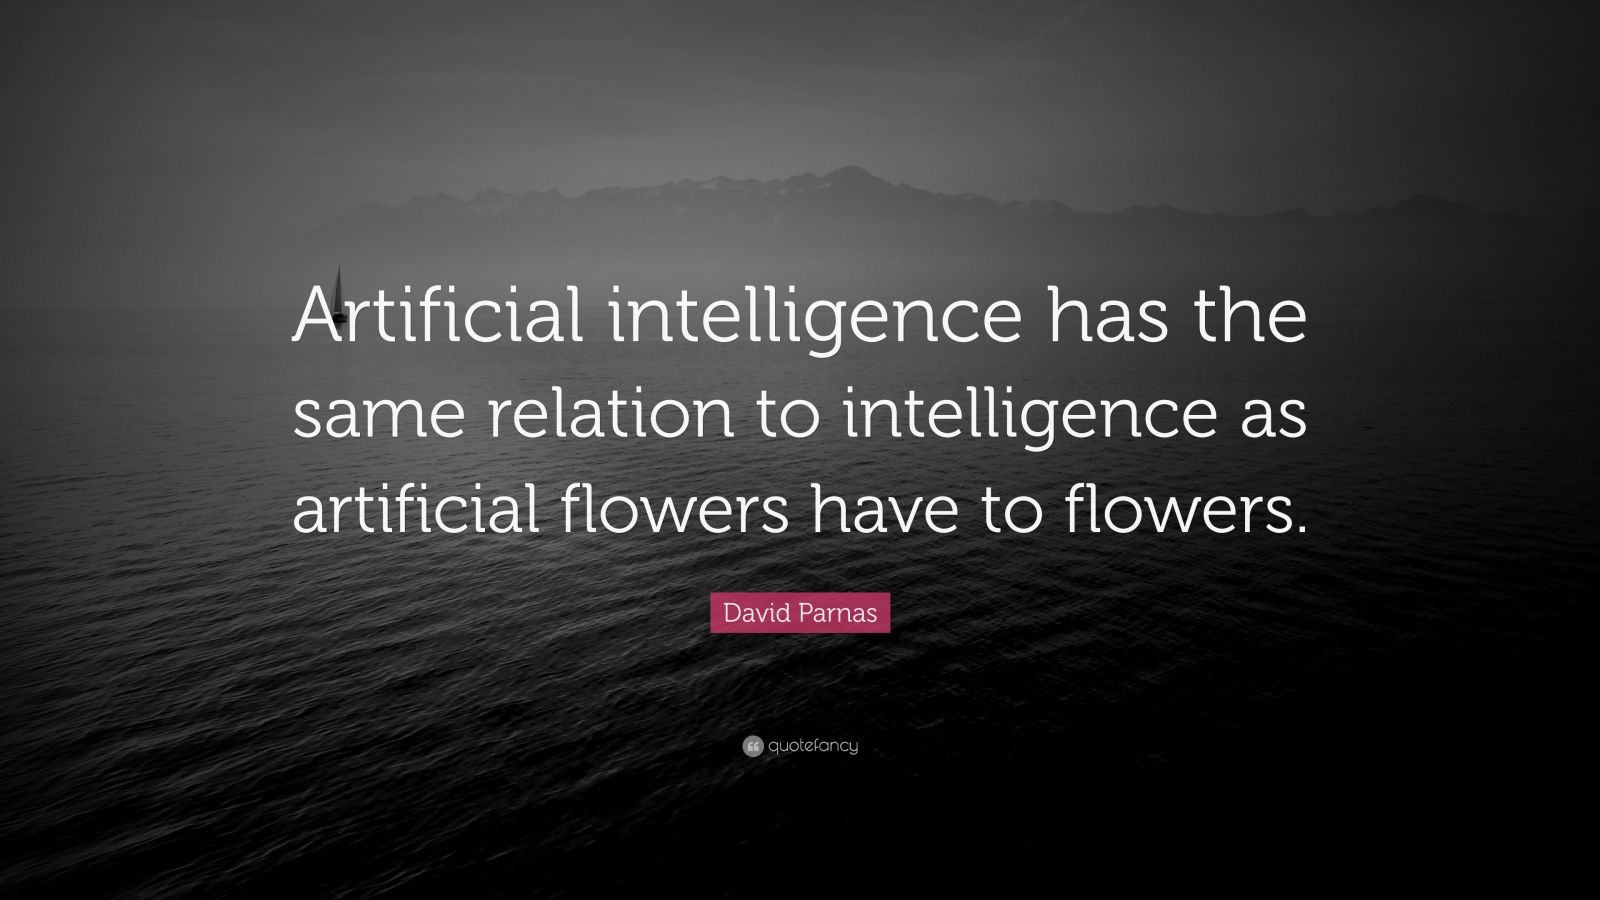 David Parnas Quote: “Artificial intelligence has the same relation to